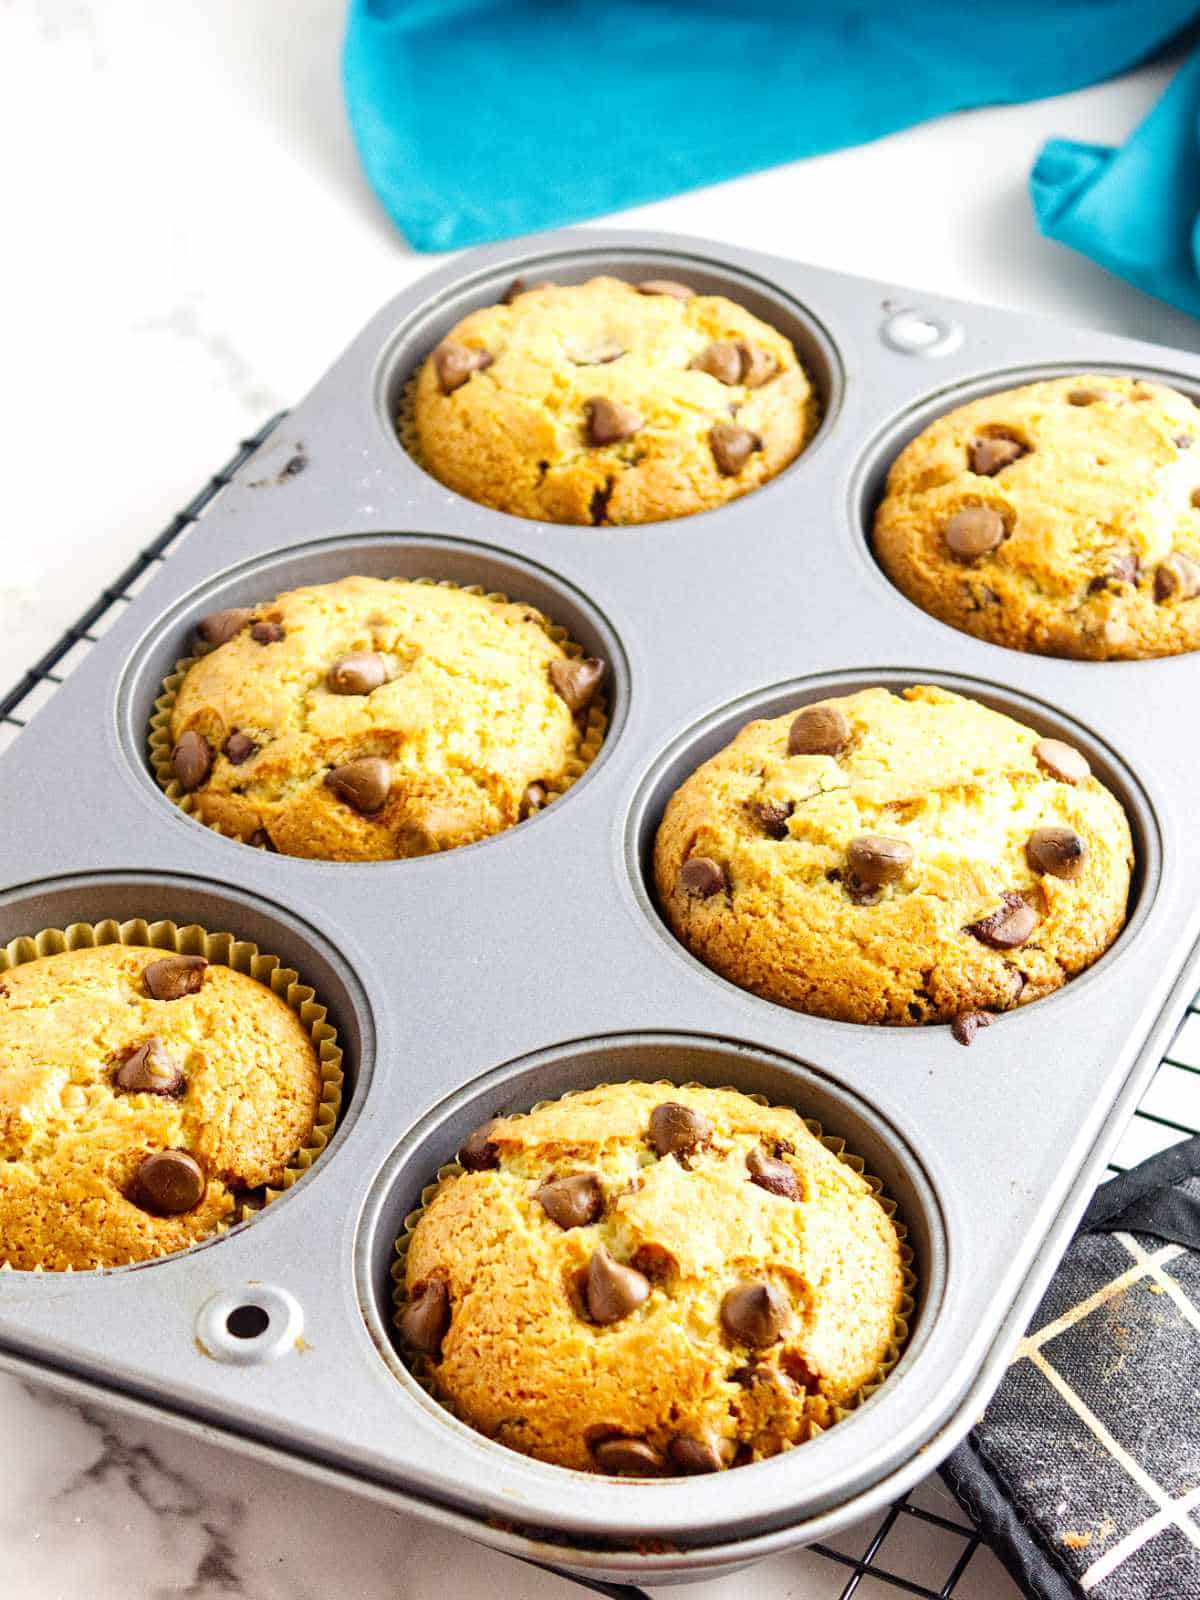 Bakery style chocolate chip muffins fresh out of the oven.